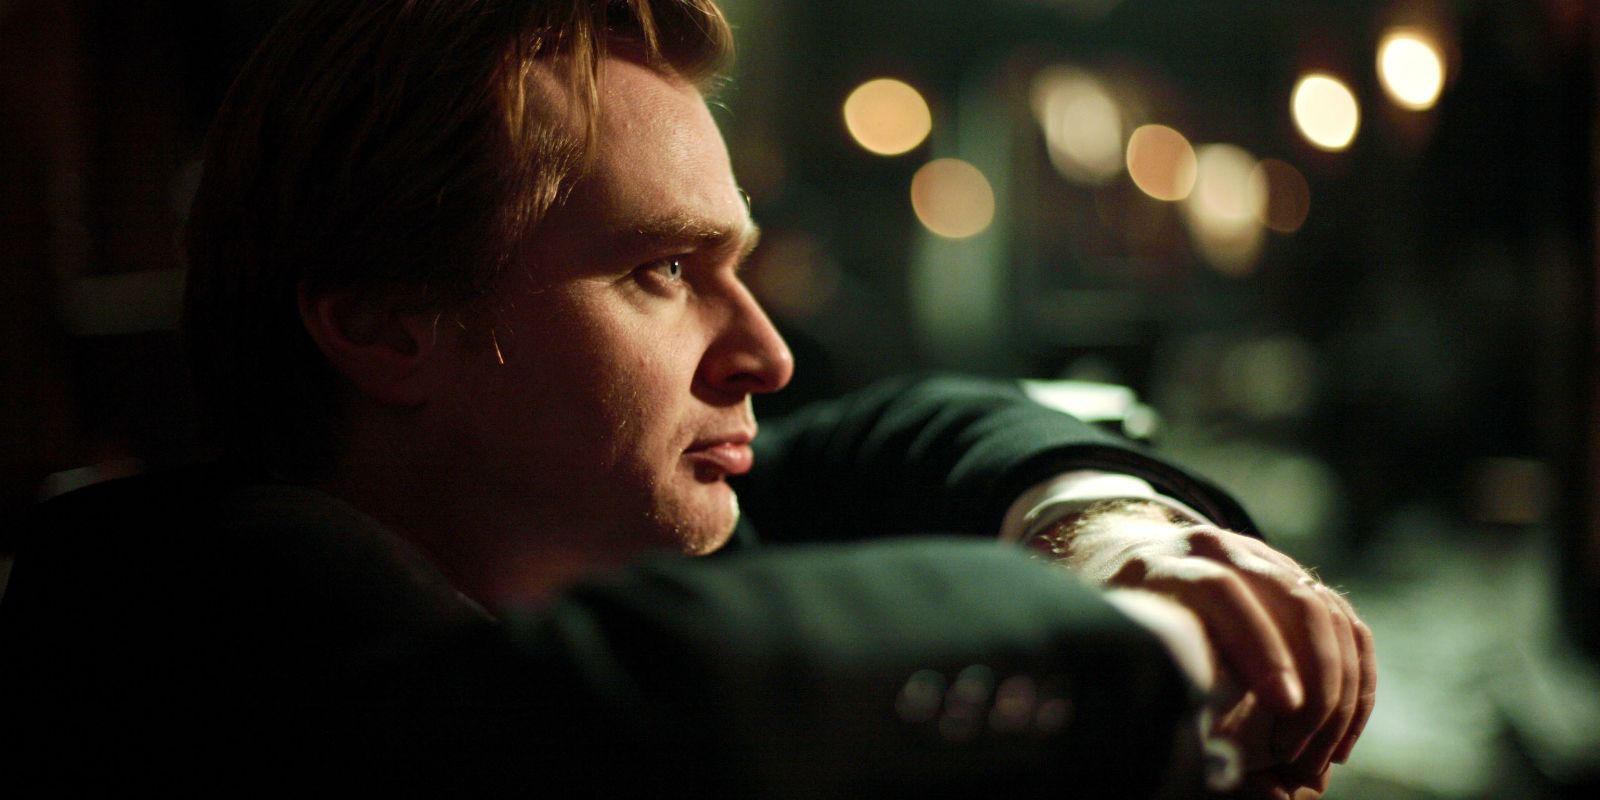 Christopher Nolan is the highest paid director